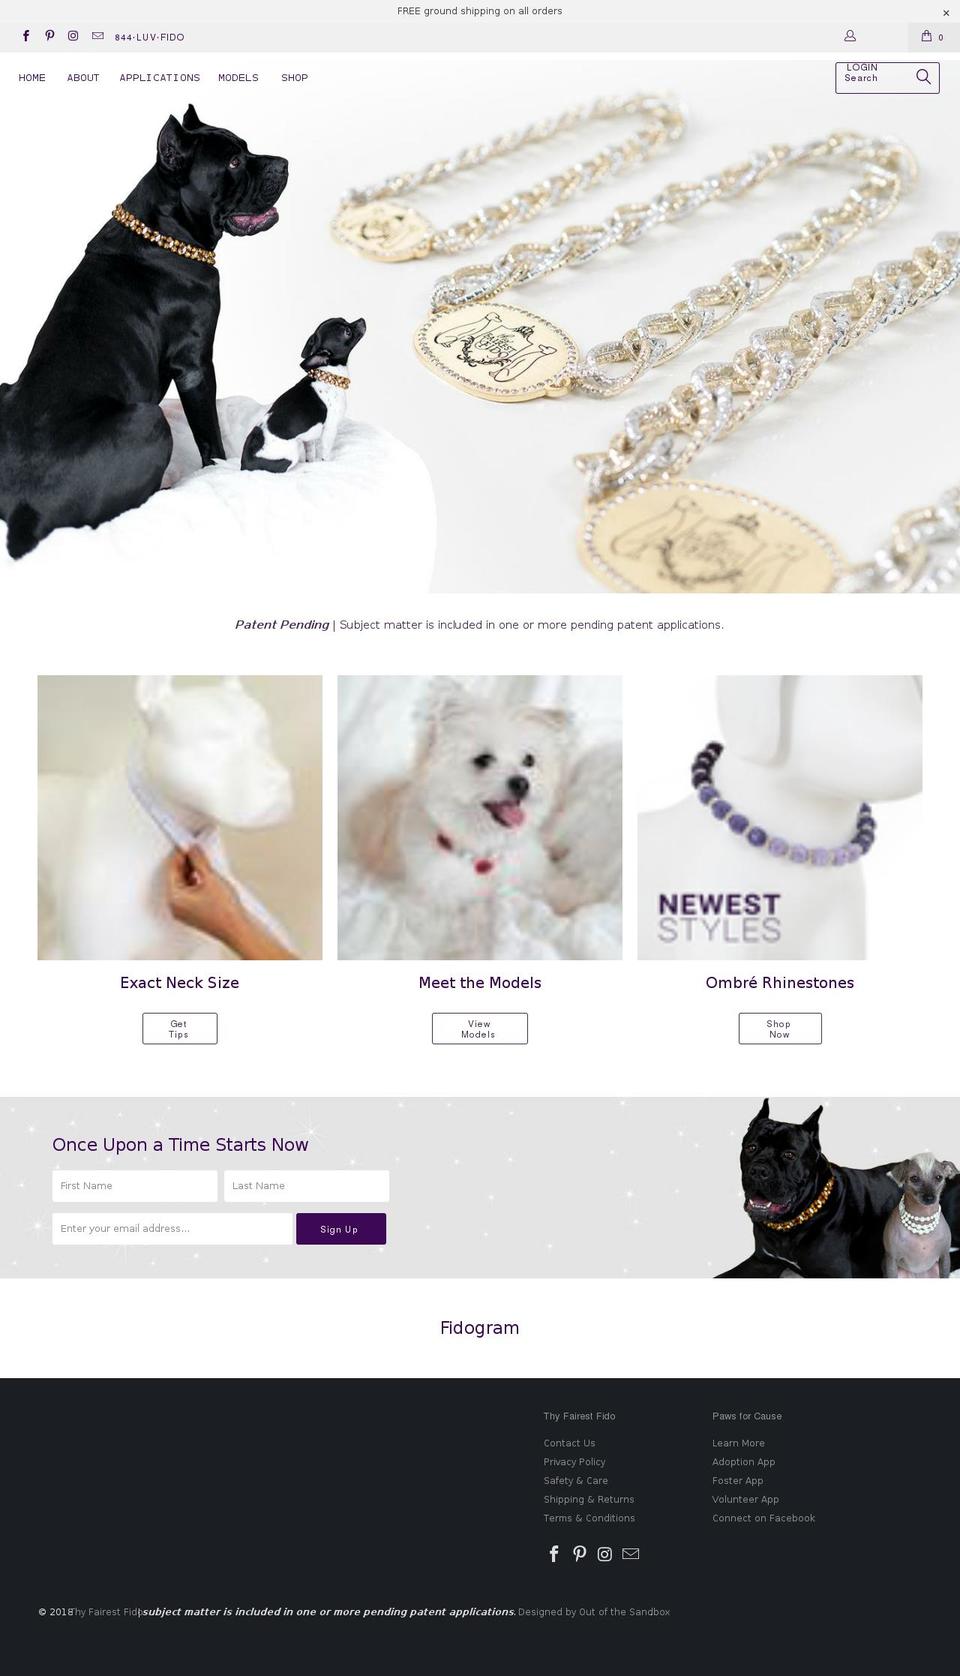 Copy of Turbo - Updated Sept-27-20-October-26-2017 Shopify theme site example fido.life